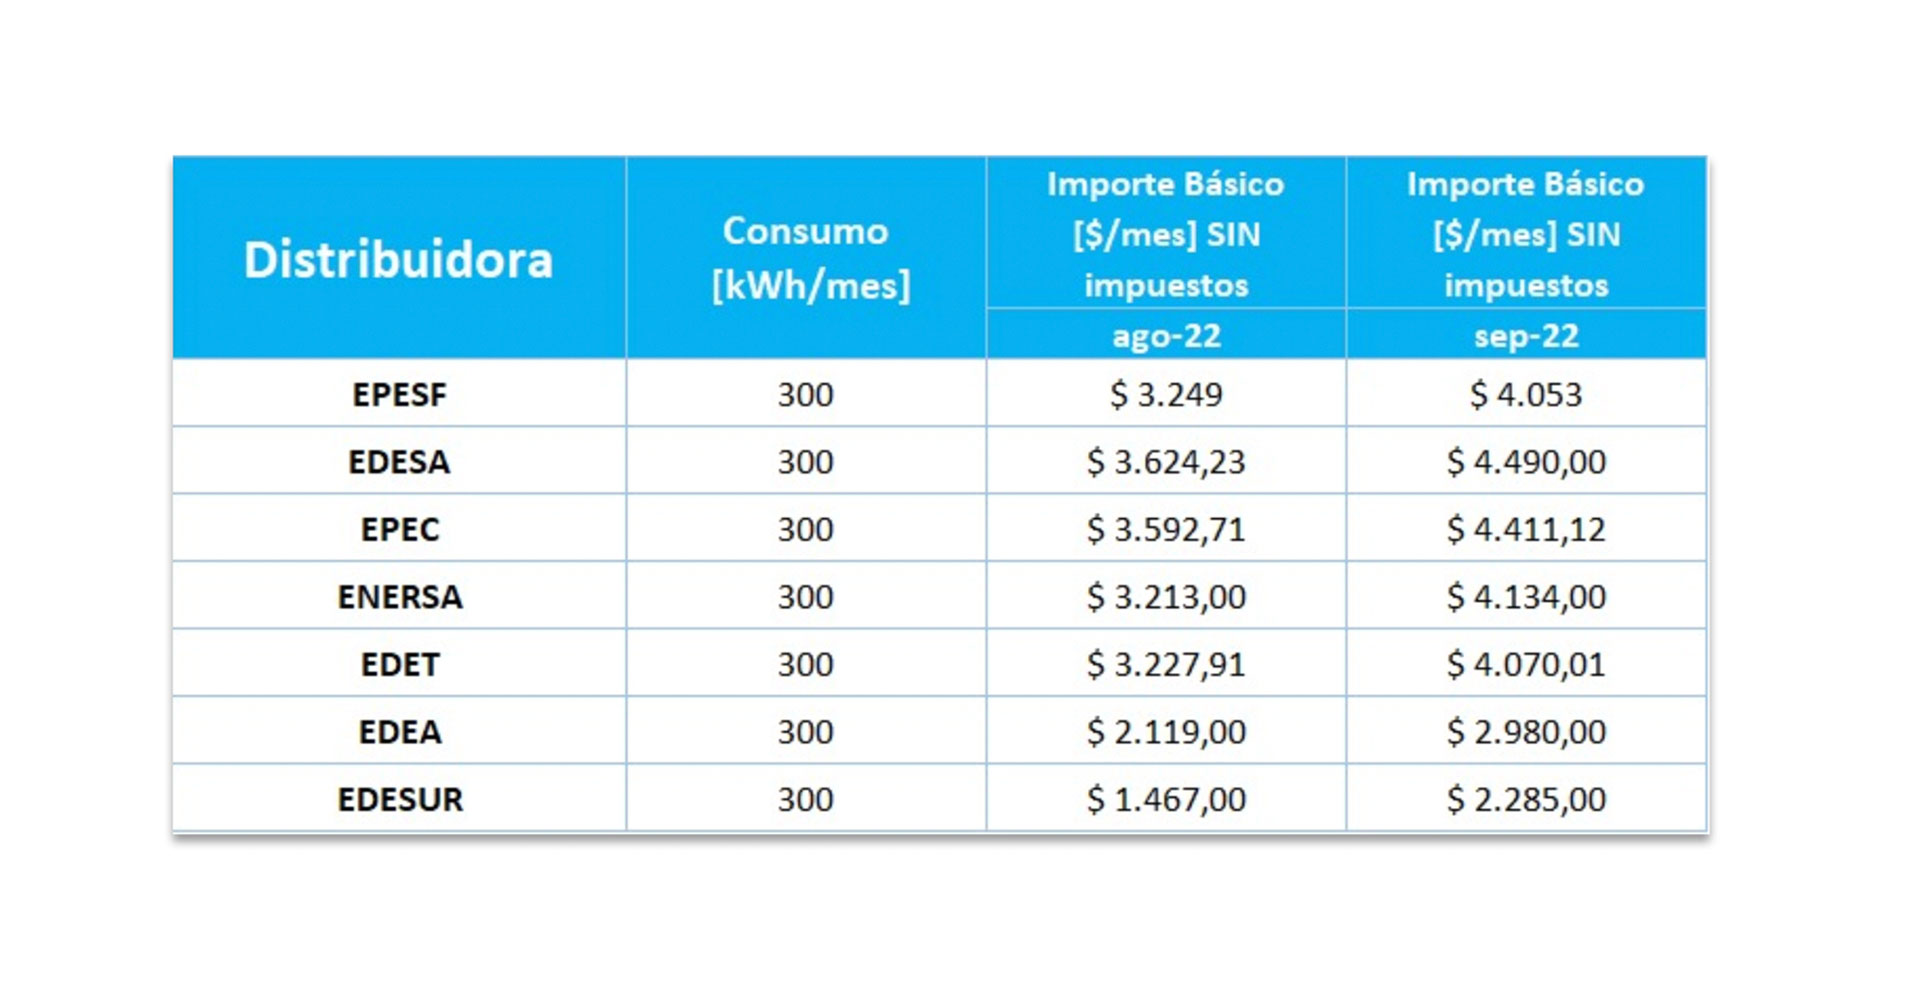 Examples of bill increases for an average consumption of 300 kWh per month 